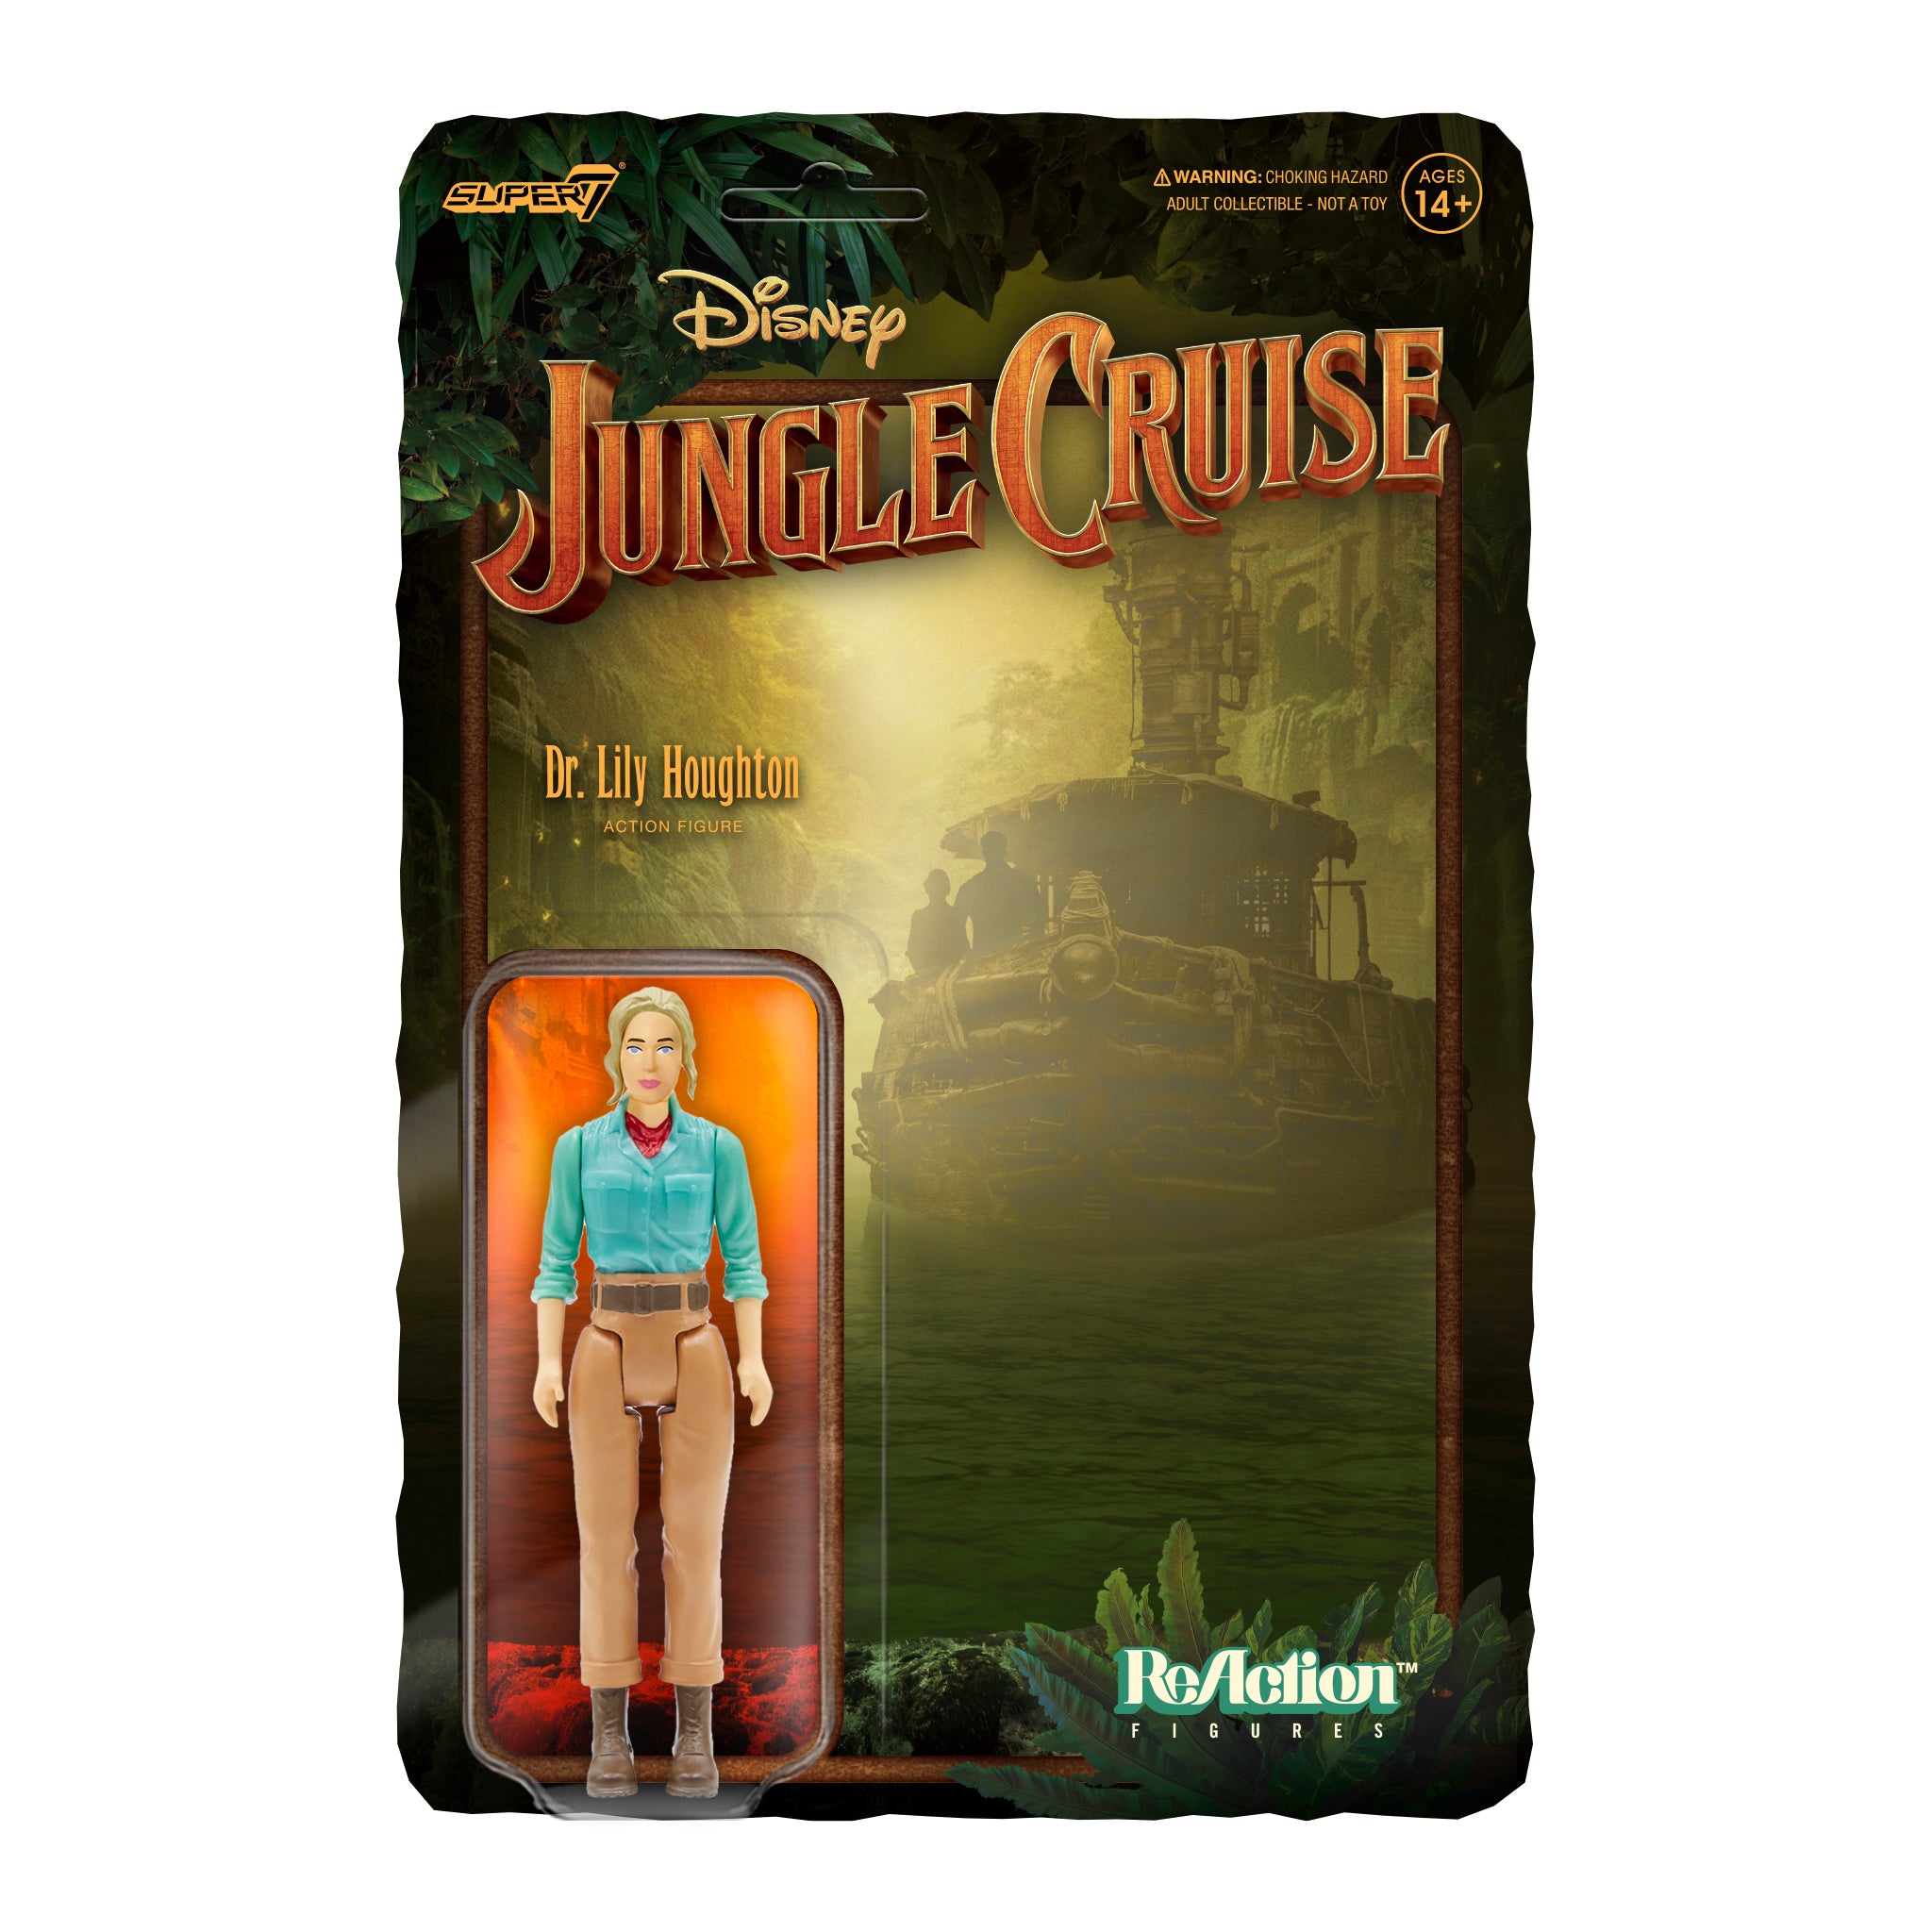 Disney Jungle Cruise ReAction Figure Wave 1 - Dr. Lily Houghton